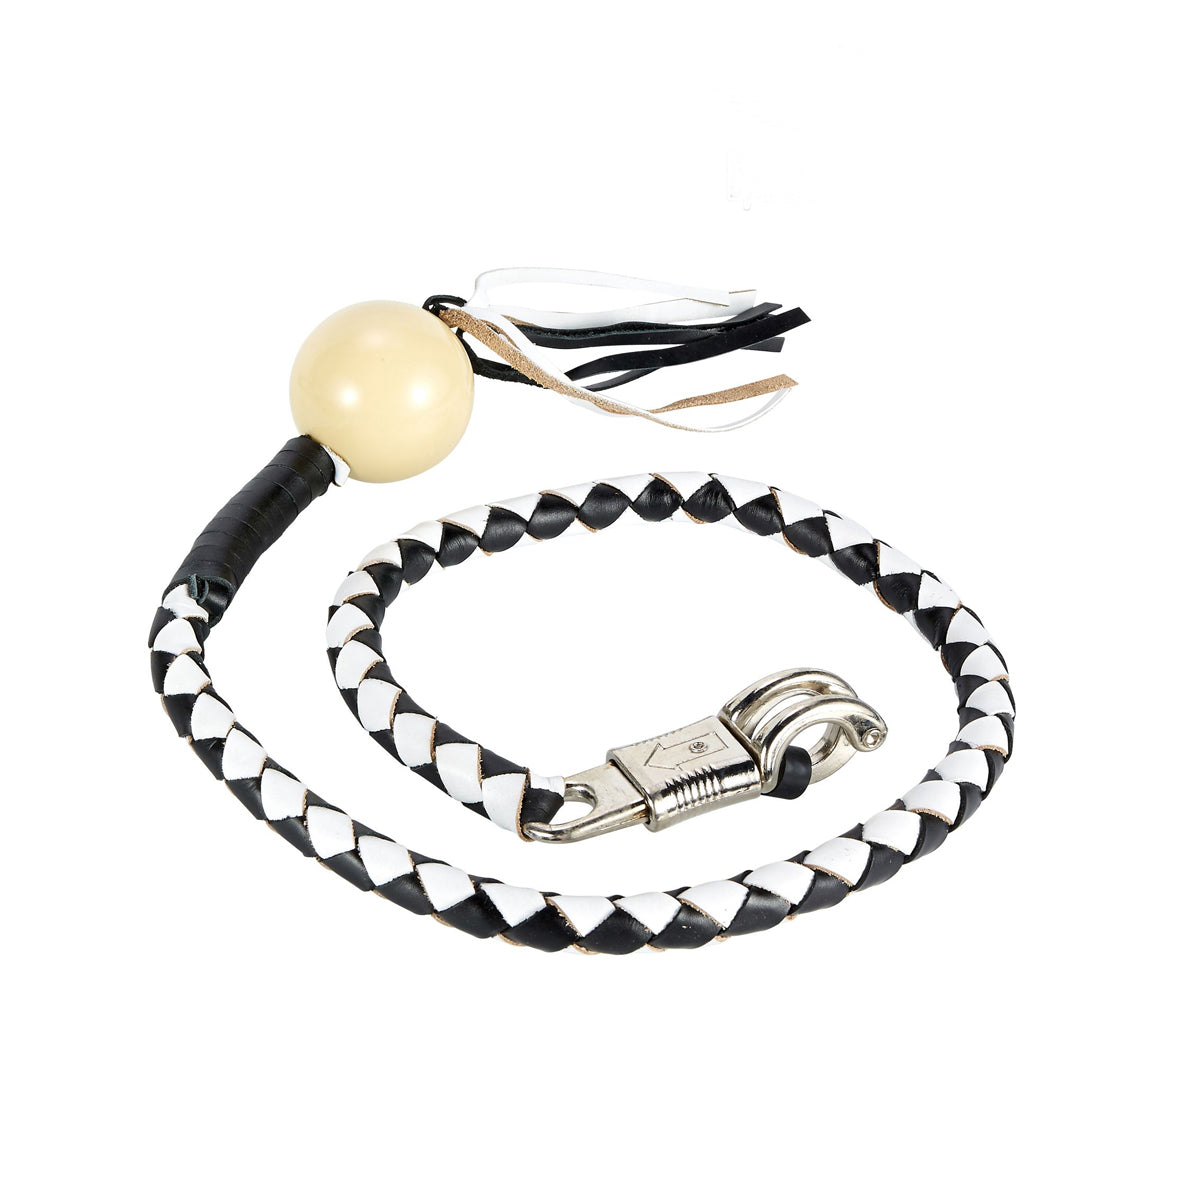 Black And White Fringed Get Back Whip W/ Pool Ball